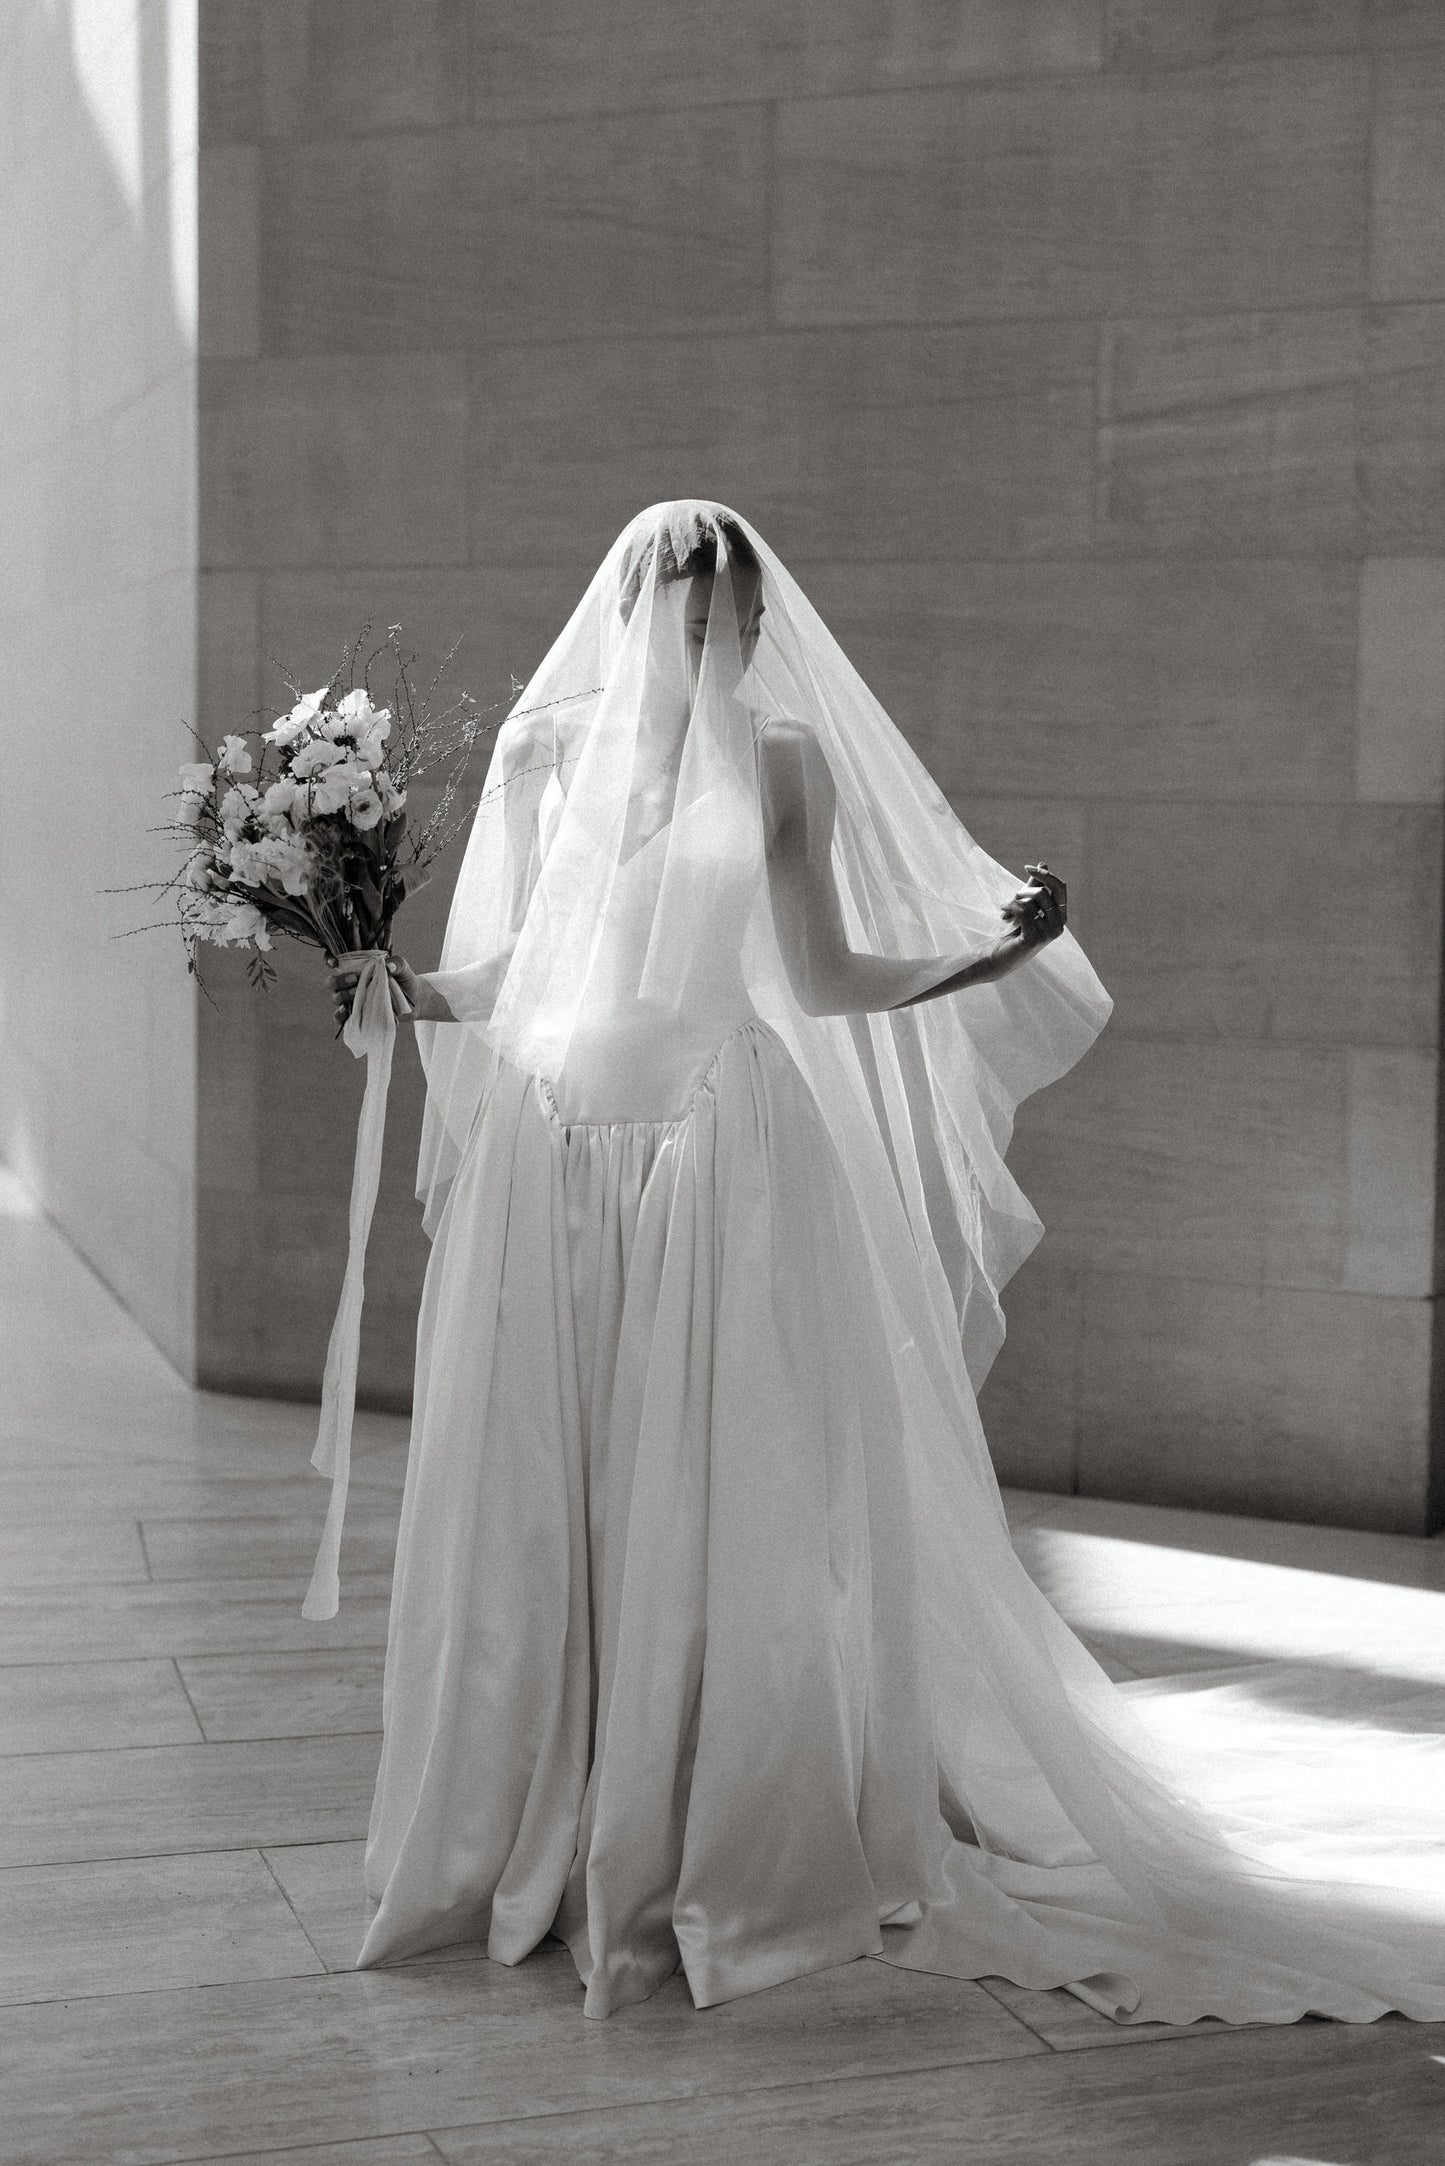 elegant bride wearing a two layer cascade wedding veil from English net fabric and holding bouquet